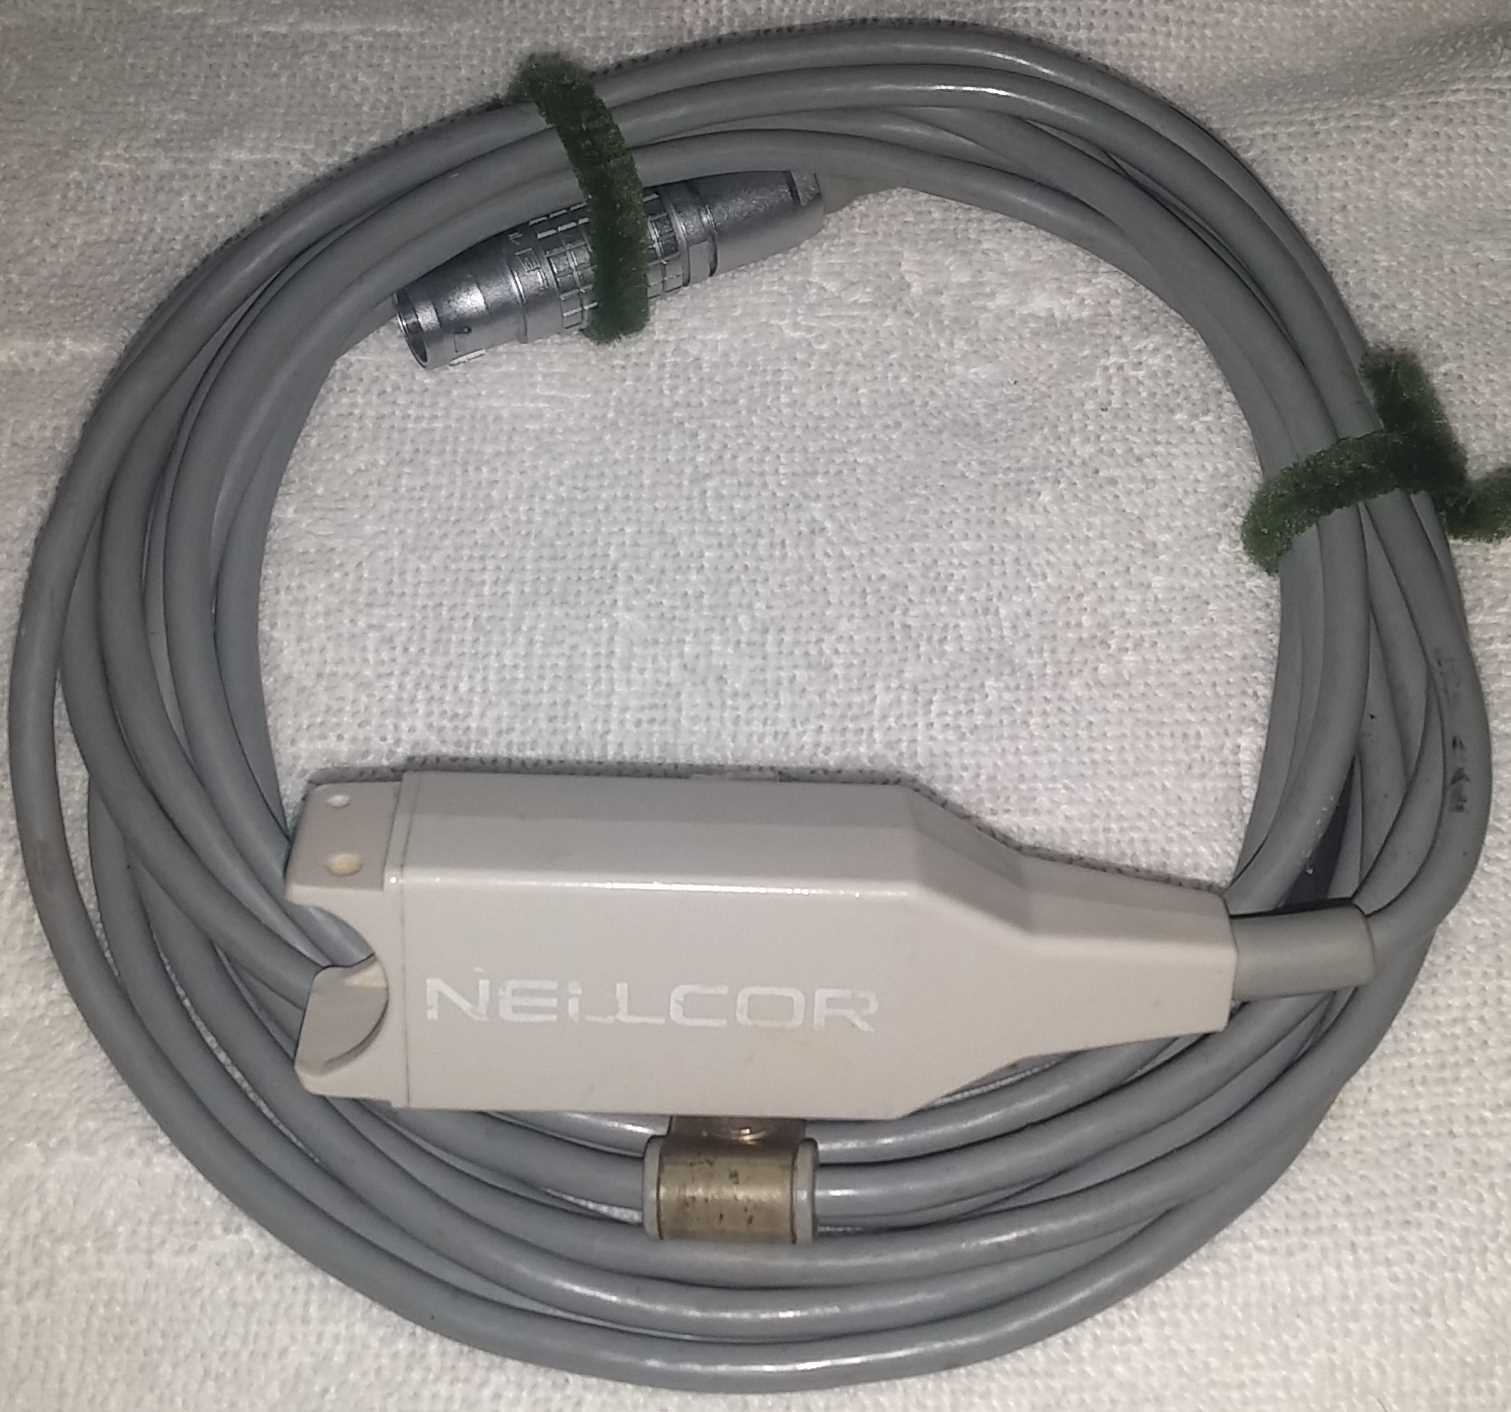 Used working Nellcor N-200 pulse oximeter cable Nellcor N-200 SPO2 Preamp Cable pulse oximeters